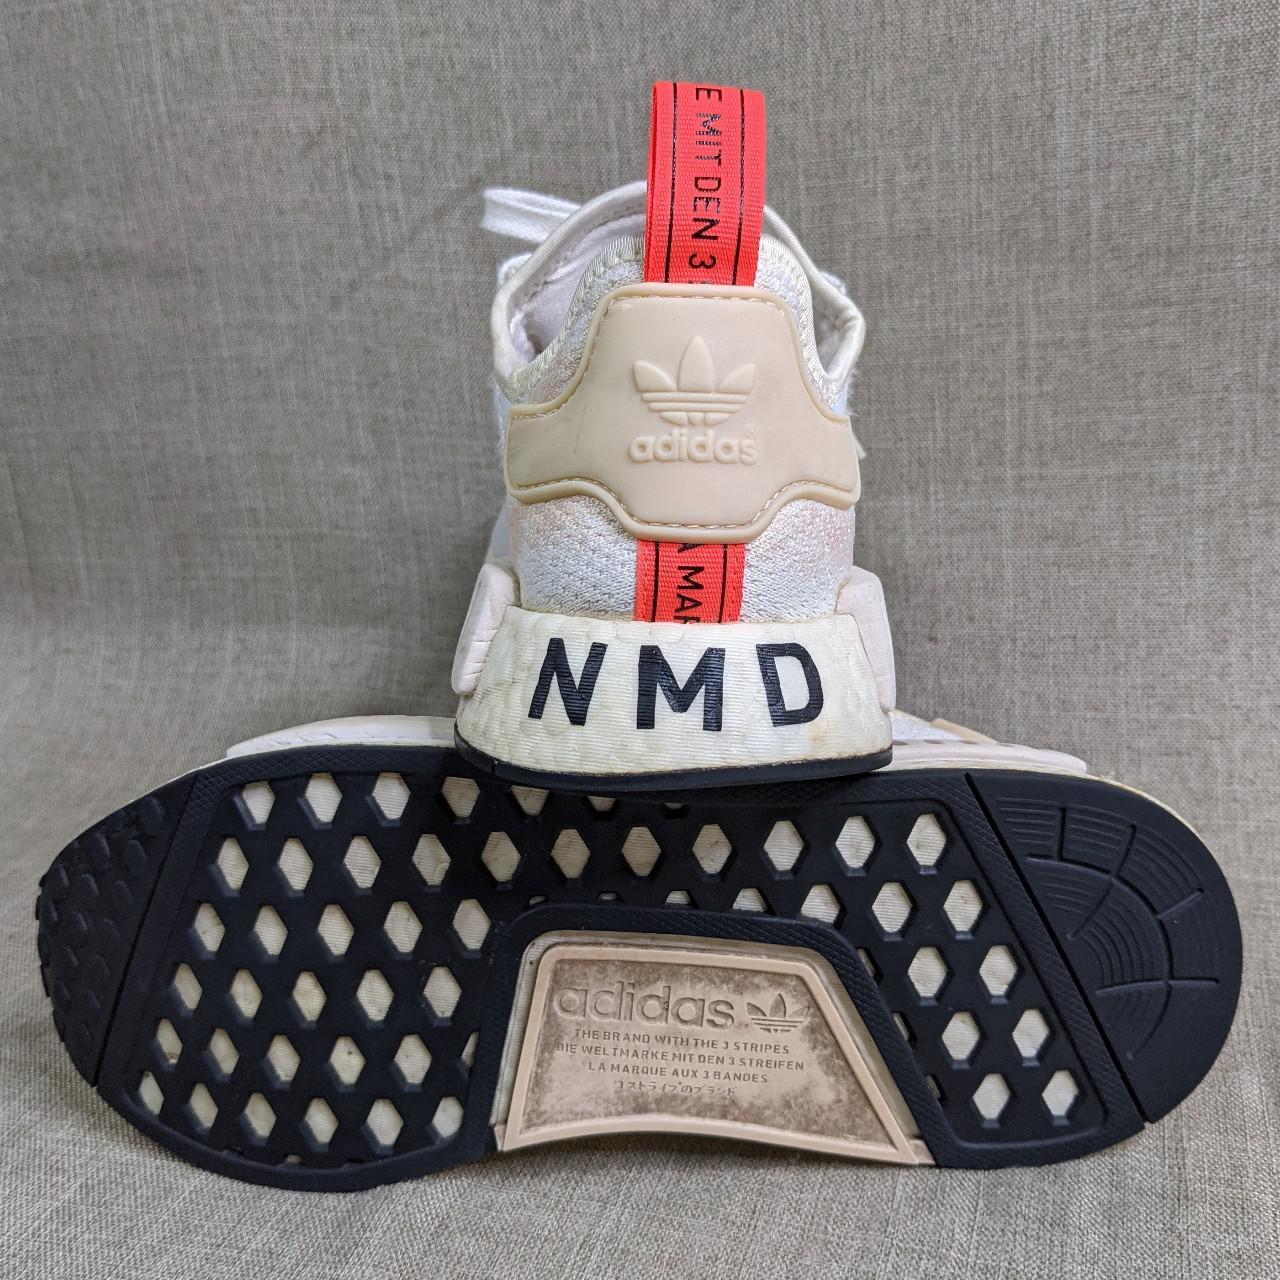 Product Image 4 - Adidas NMD R1 sneakers.

Women's size